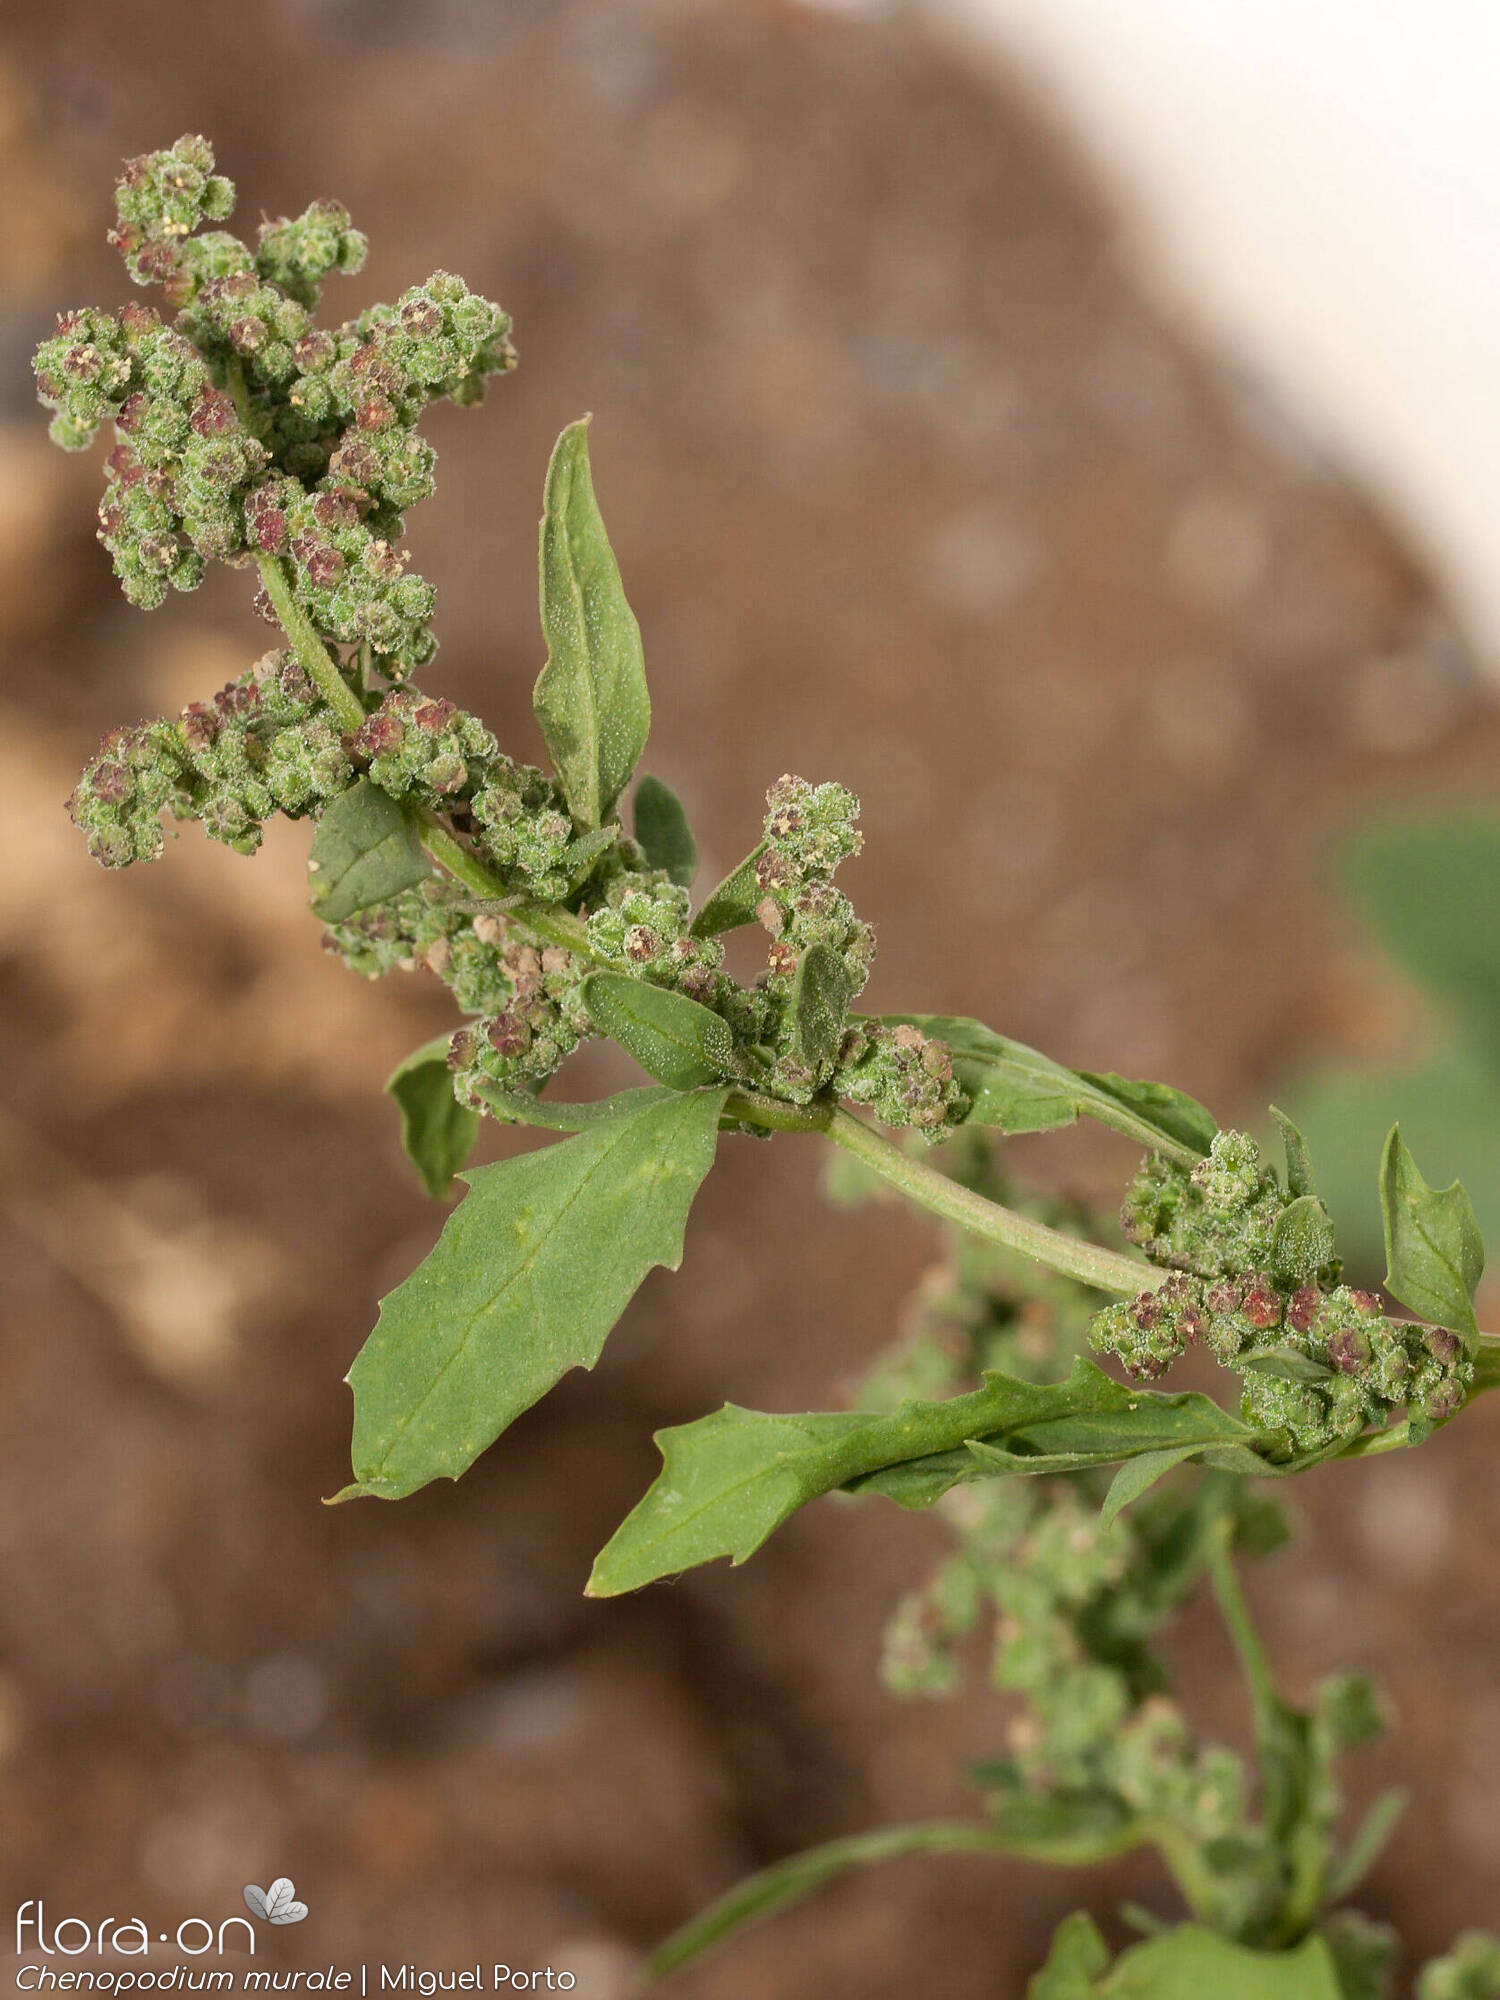 Chenopodium murale - Flor (geral) | Miguel Porto; CC BY-NC 4.0